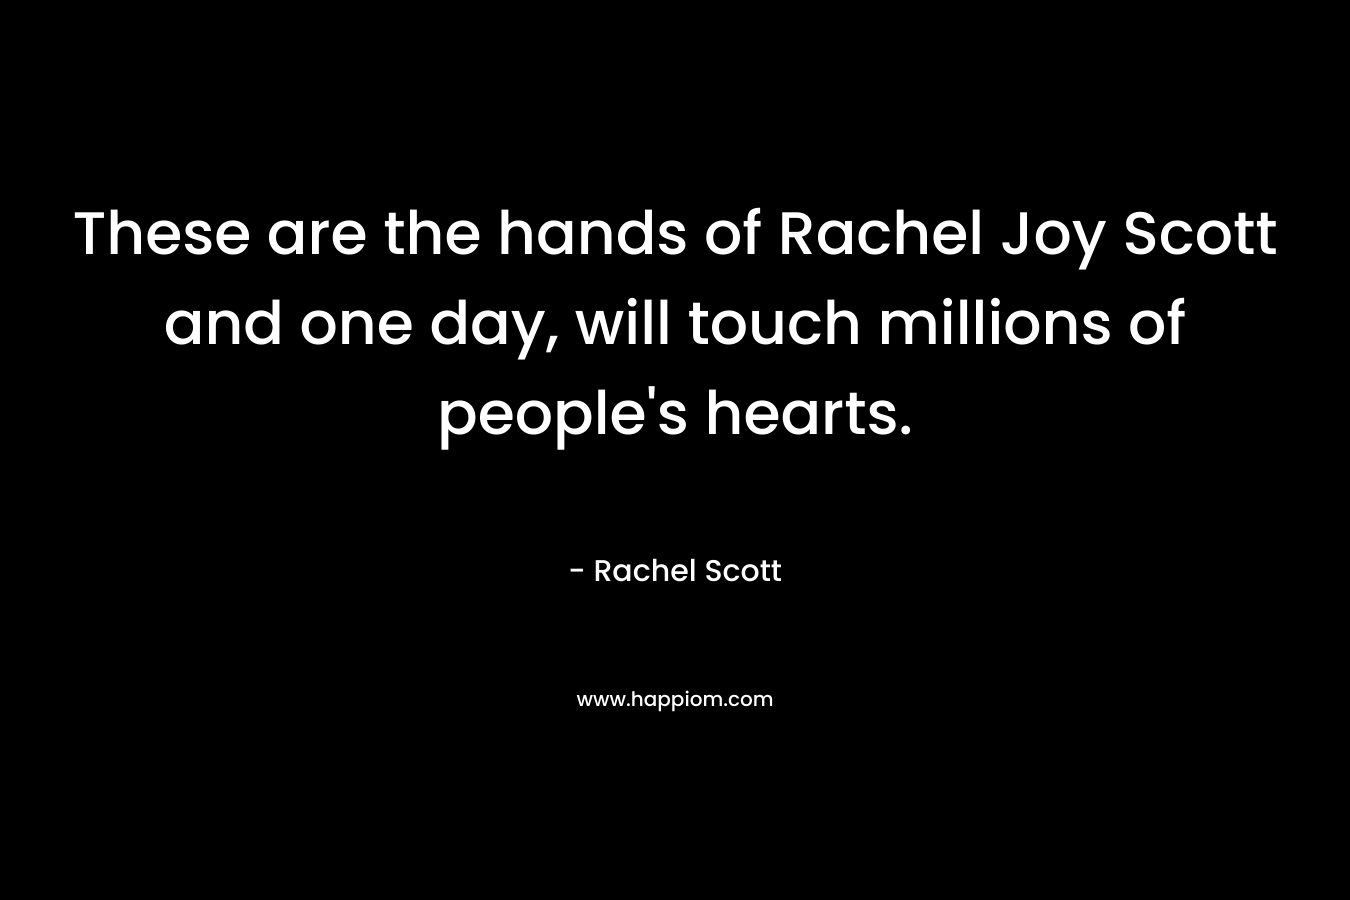 These are the hands of Rachel Joy Scott and one day, will touch millions of people's hearts.